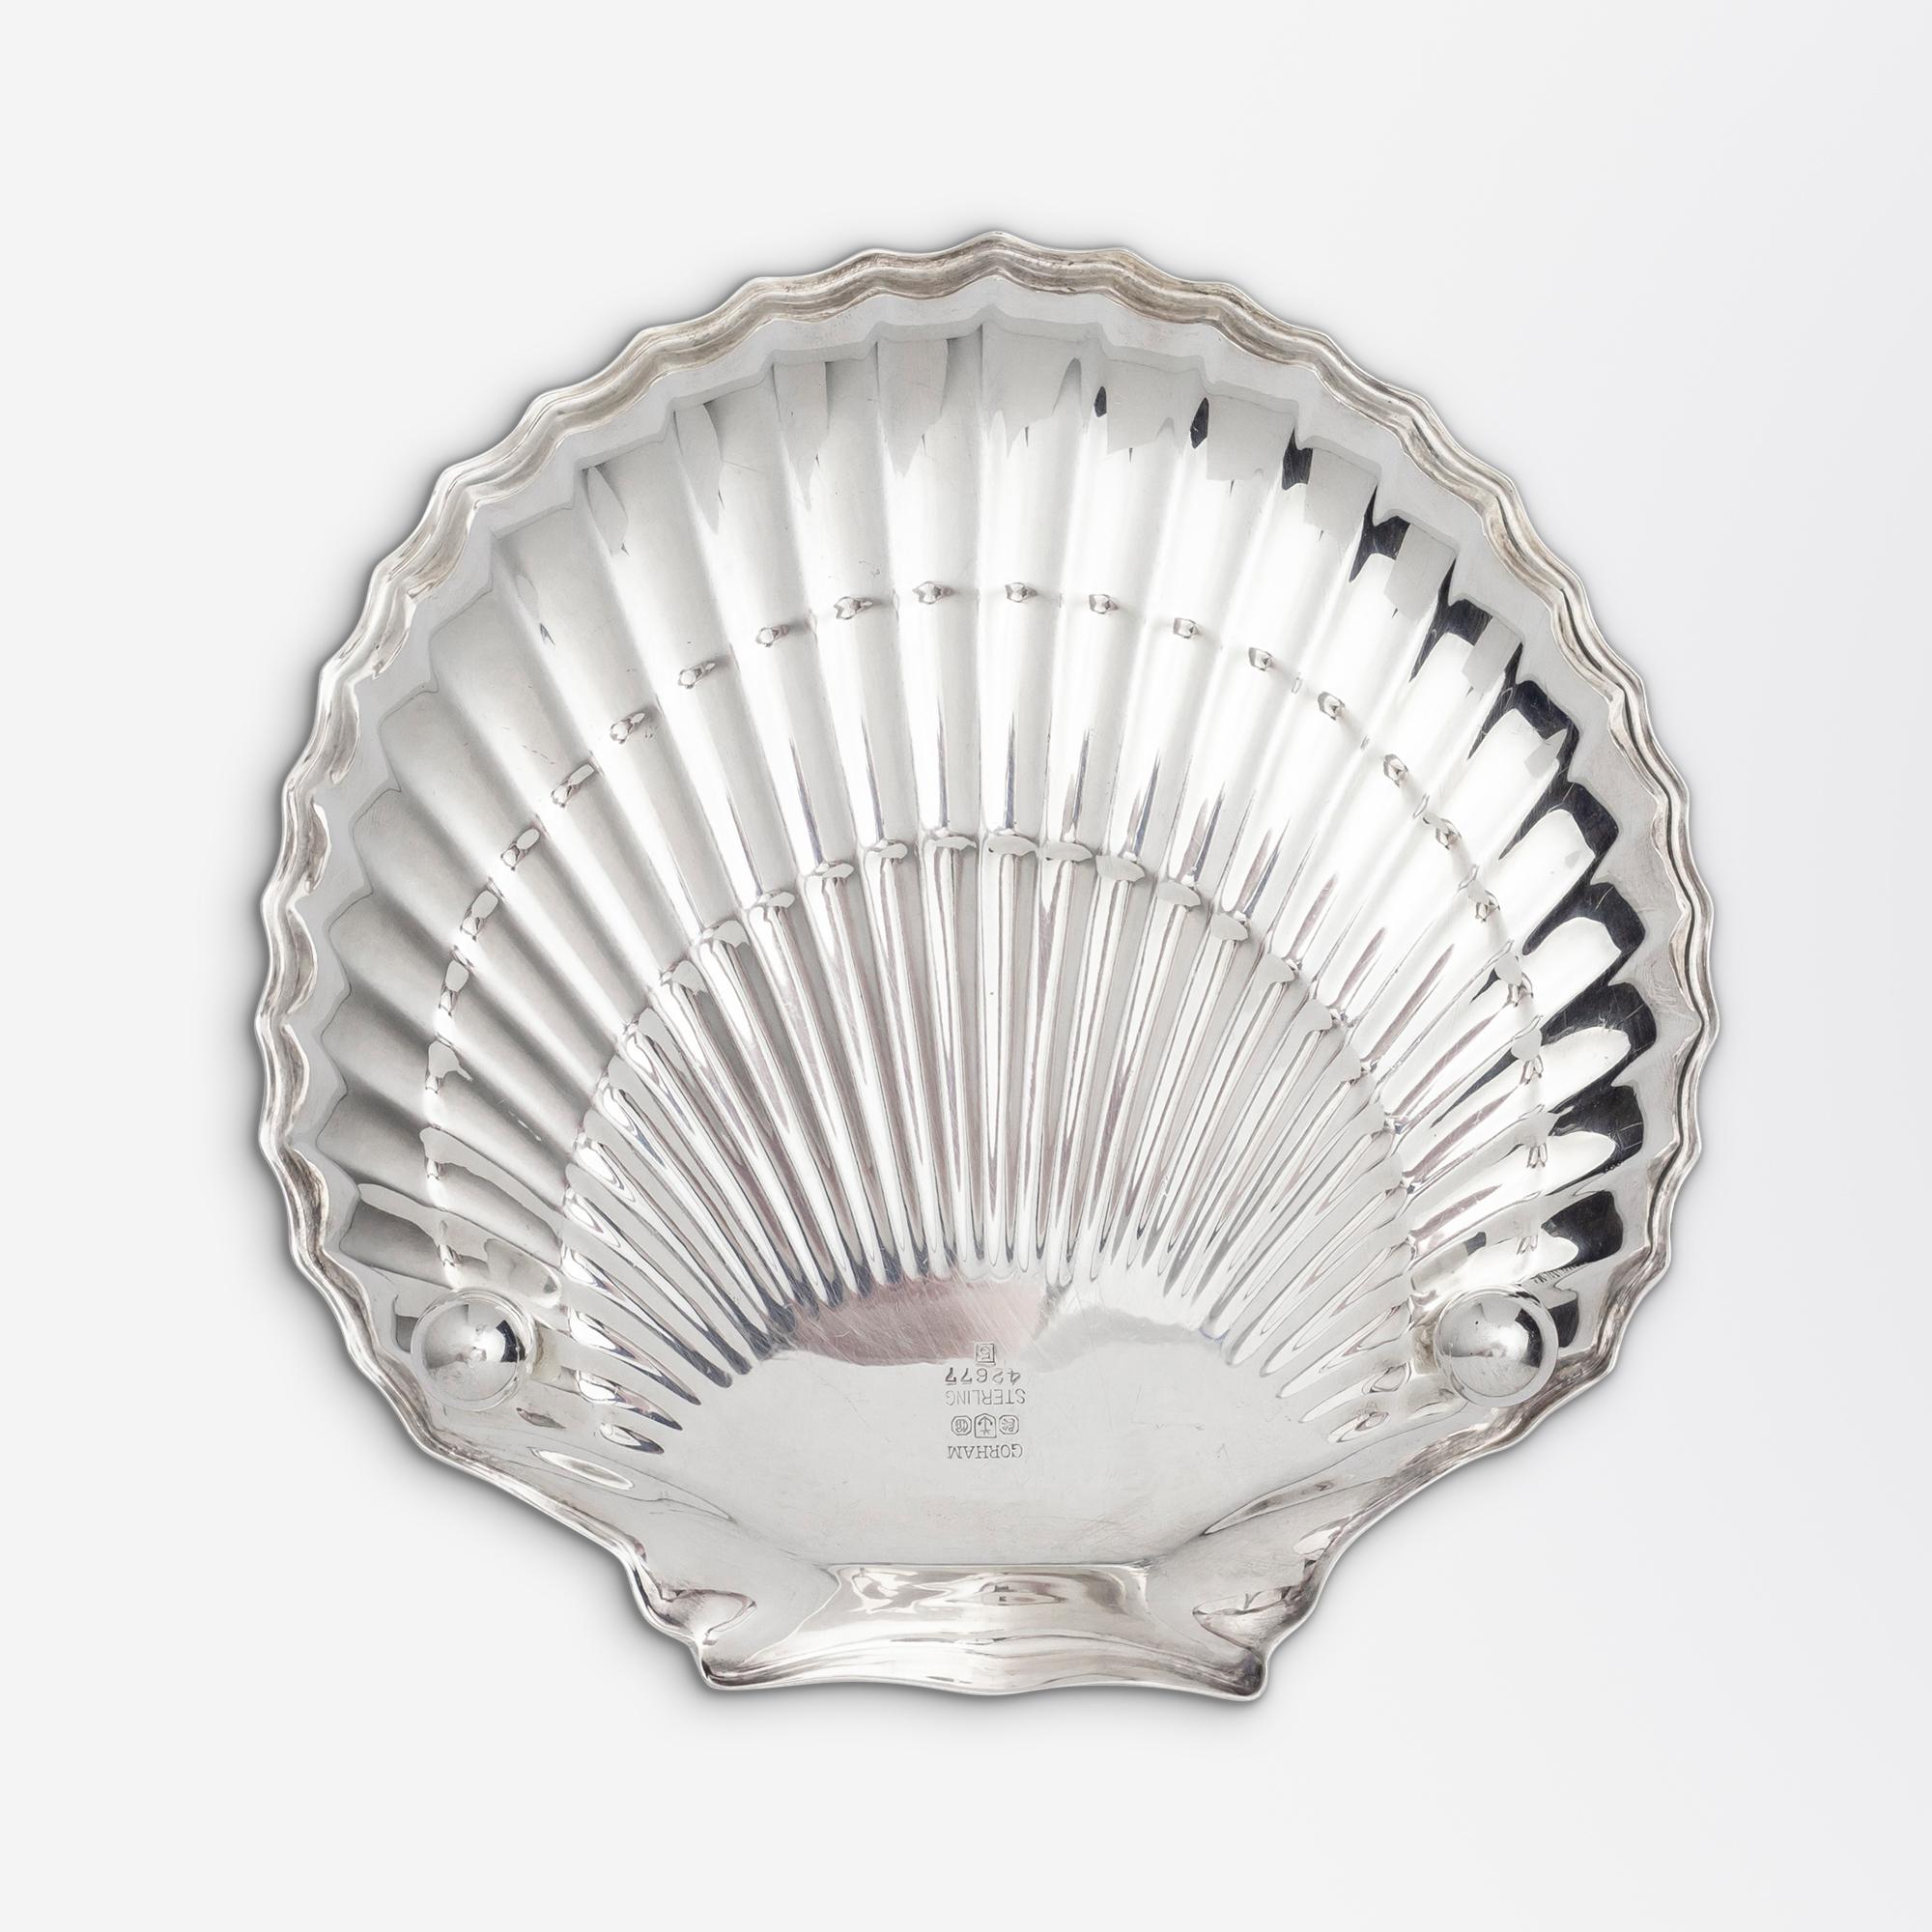 A sterling silver, scallop shell form bon-bon dish with ball feet by Gorham silversmiths. This beautifully rendered dish was manufactured in 1945 according to the date mark on the rear and was produced in Rhode Island in the United States. The